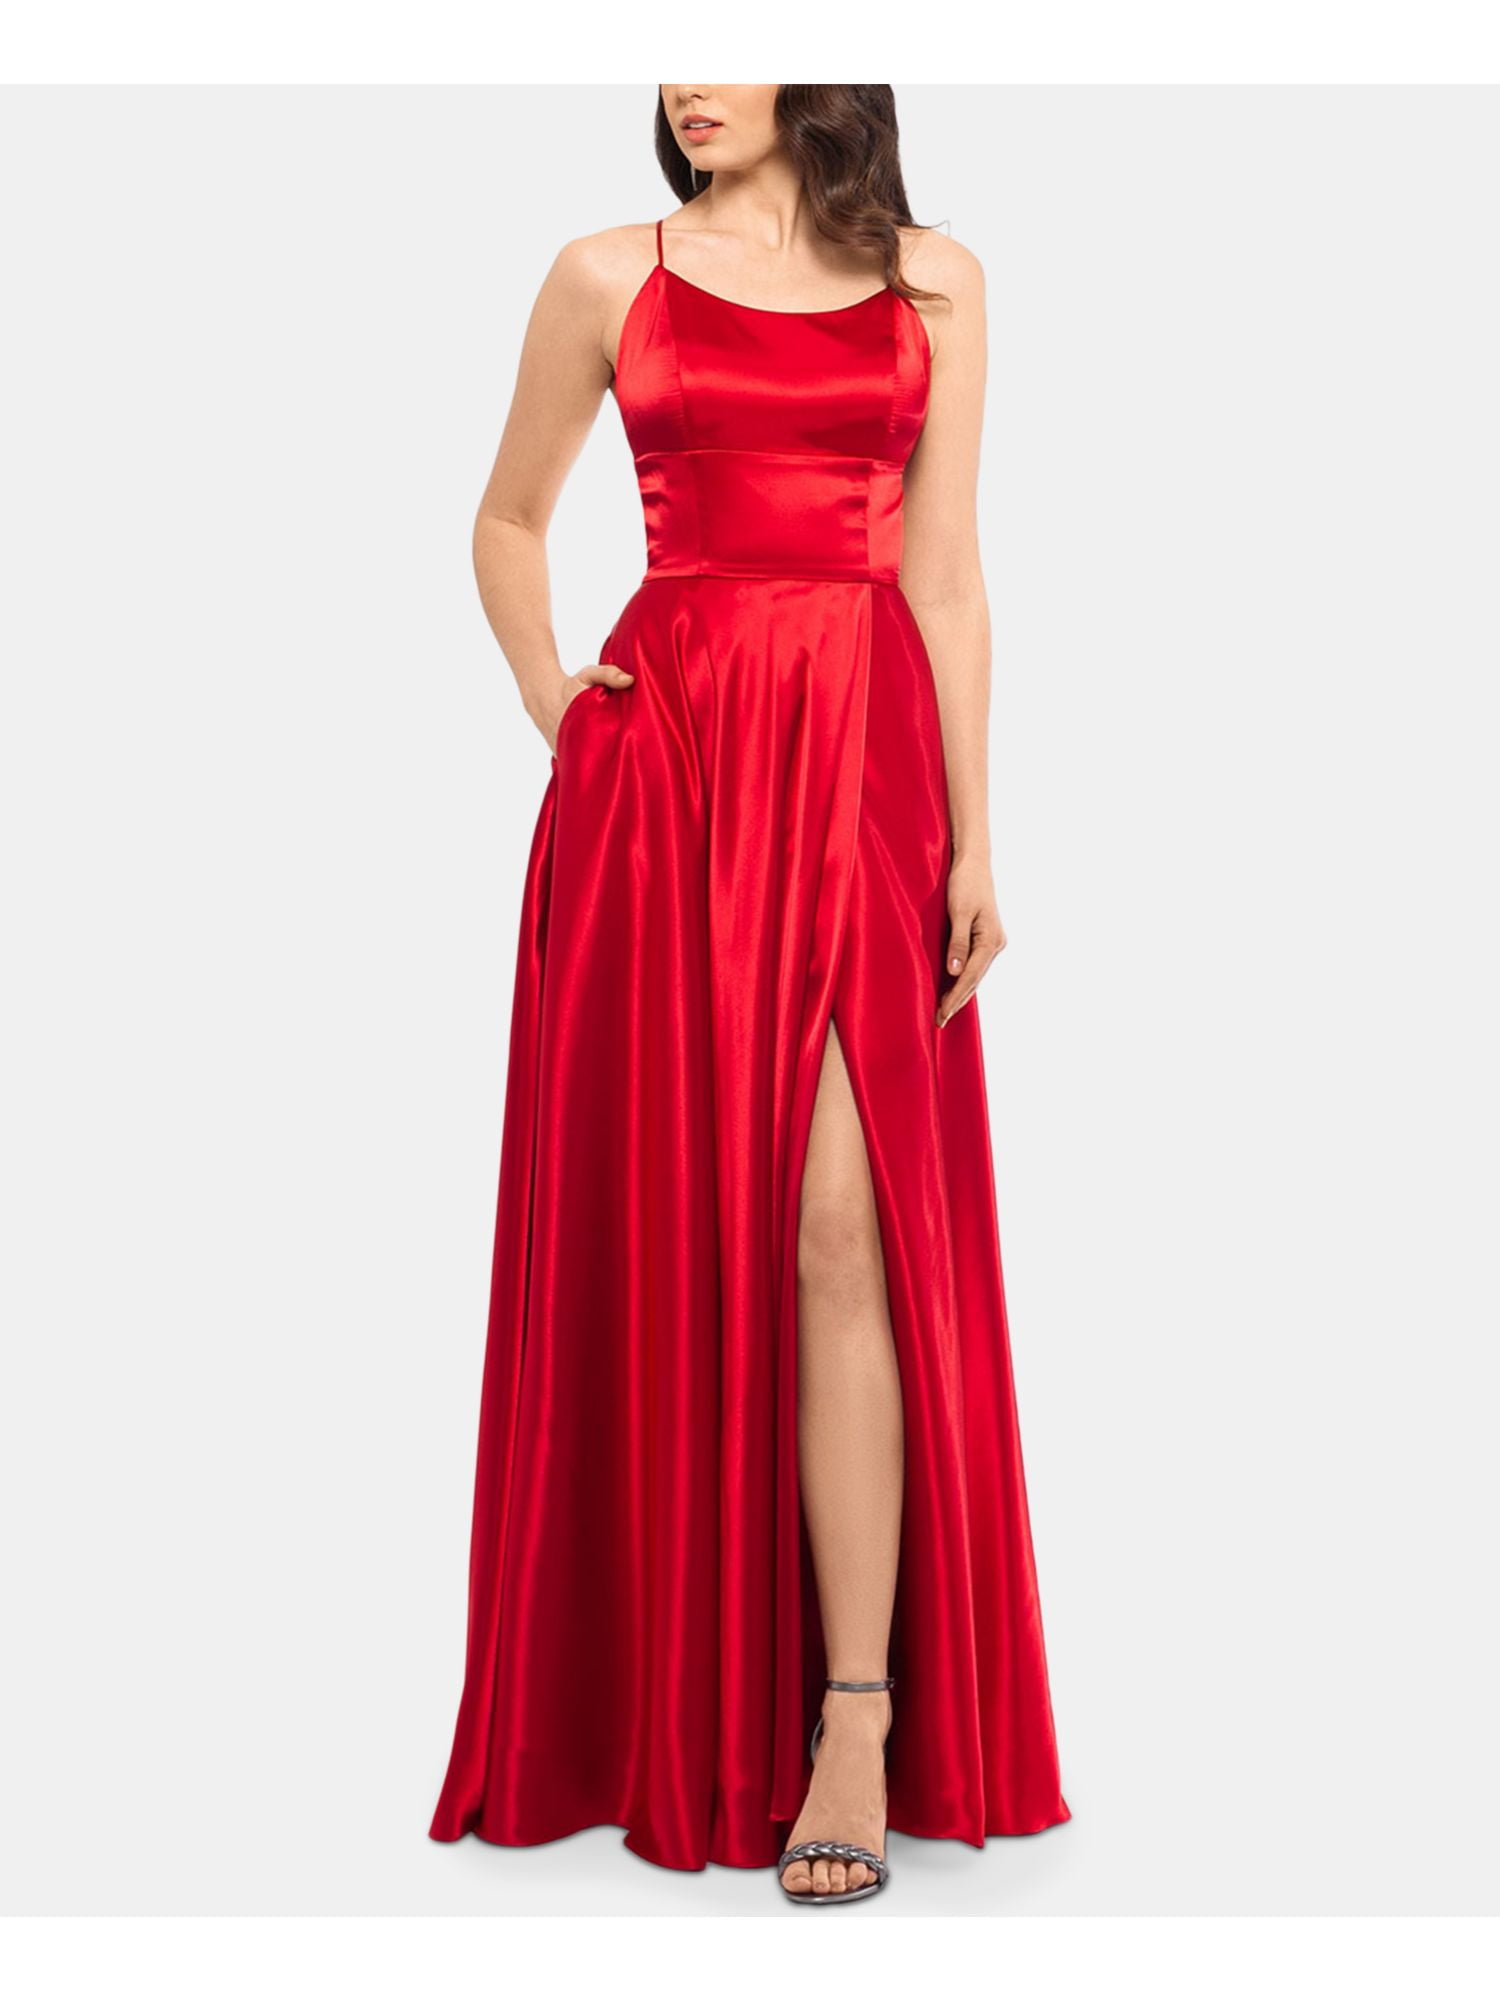 BETSY & ADAM Womens Red Spaghetti Strap Full-Length Formal Fit + Flare ...